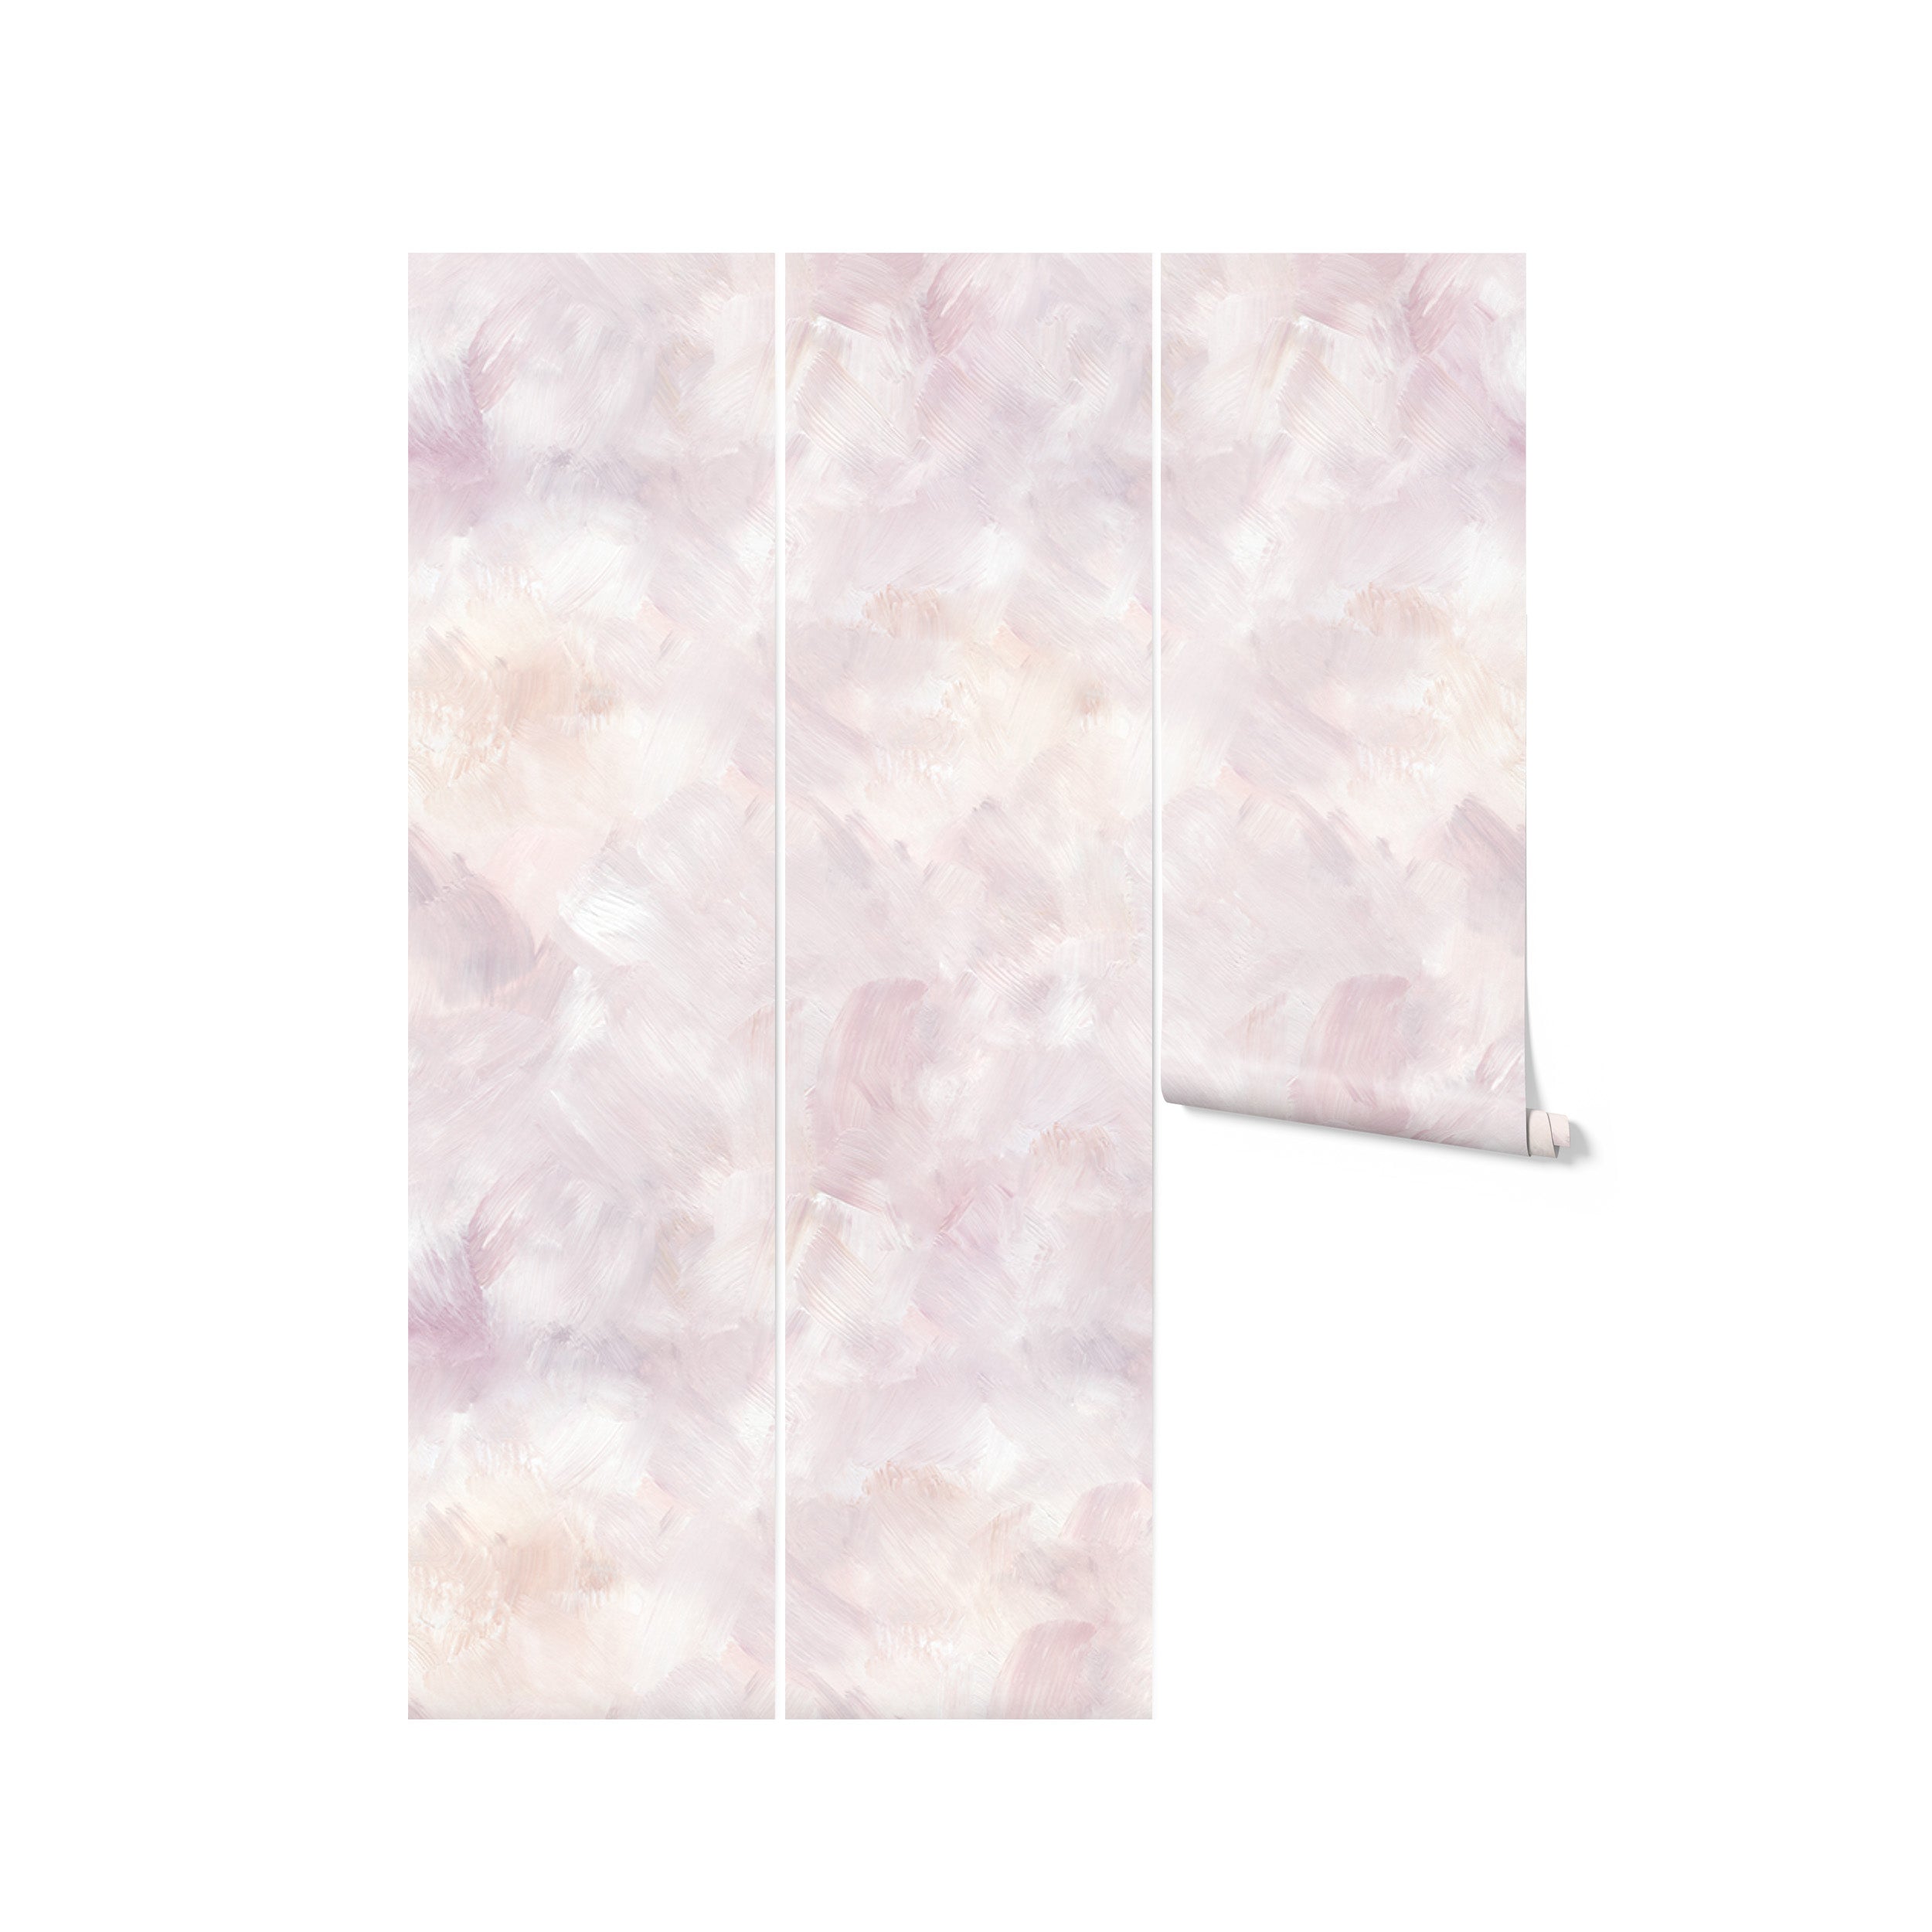 A roll of Pink Paint Texture Wallpaper with a soft, abstract brushstroke pattern in varying shades of pink and white. The wallpaper roll is partially unrolled, revealing its intricate and artistic design, perfect for adding a gentle touch of color to any room.